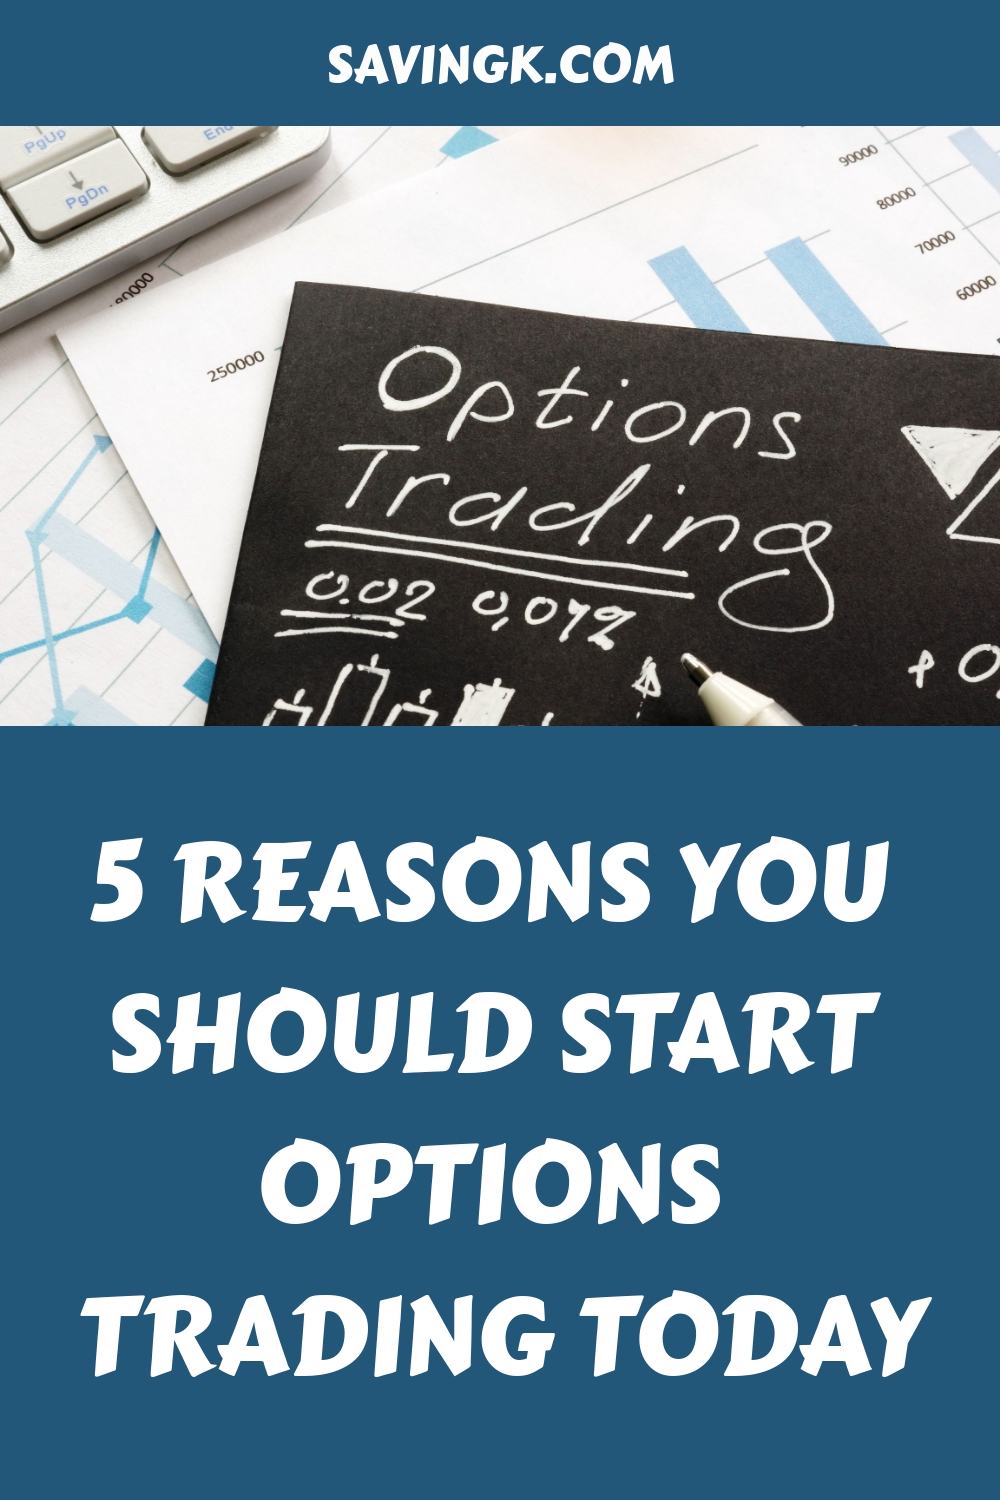 5 Reasons You Should Start Options Trading Today